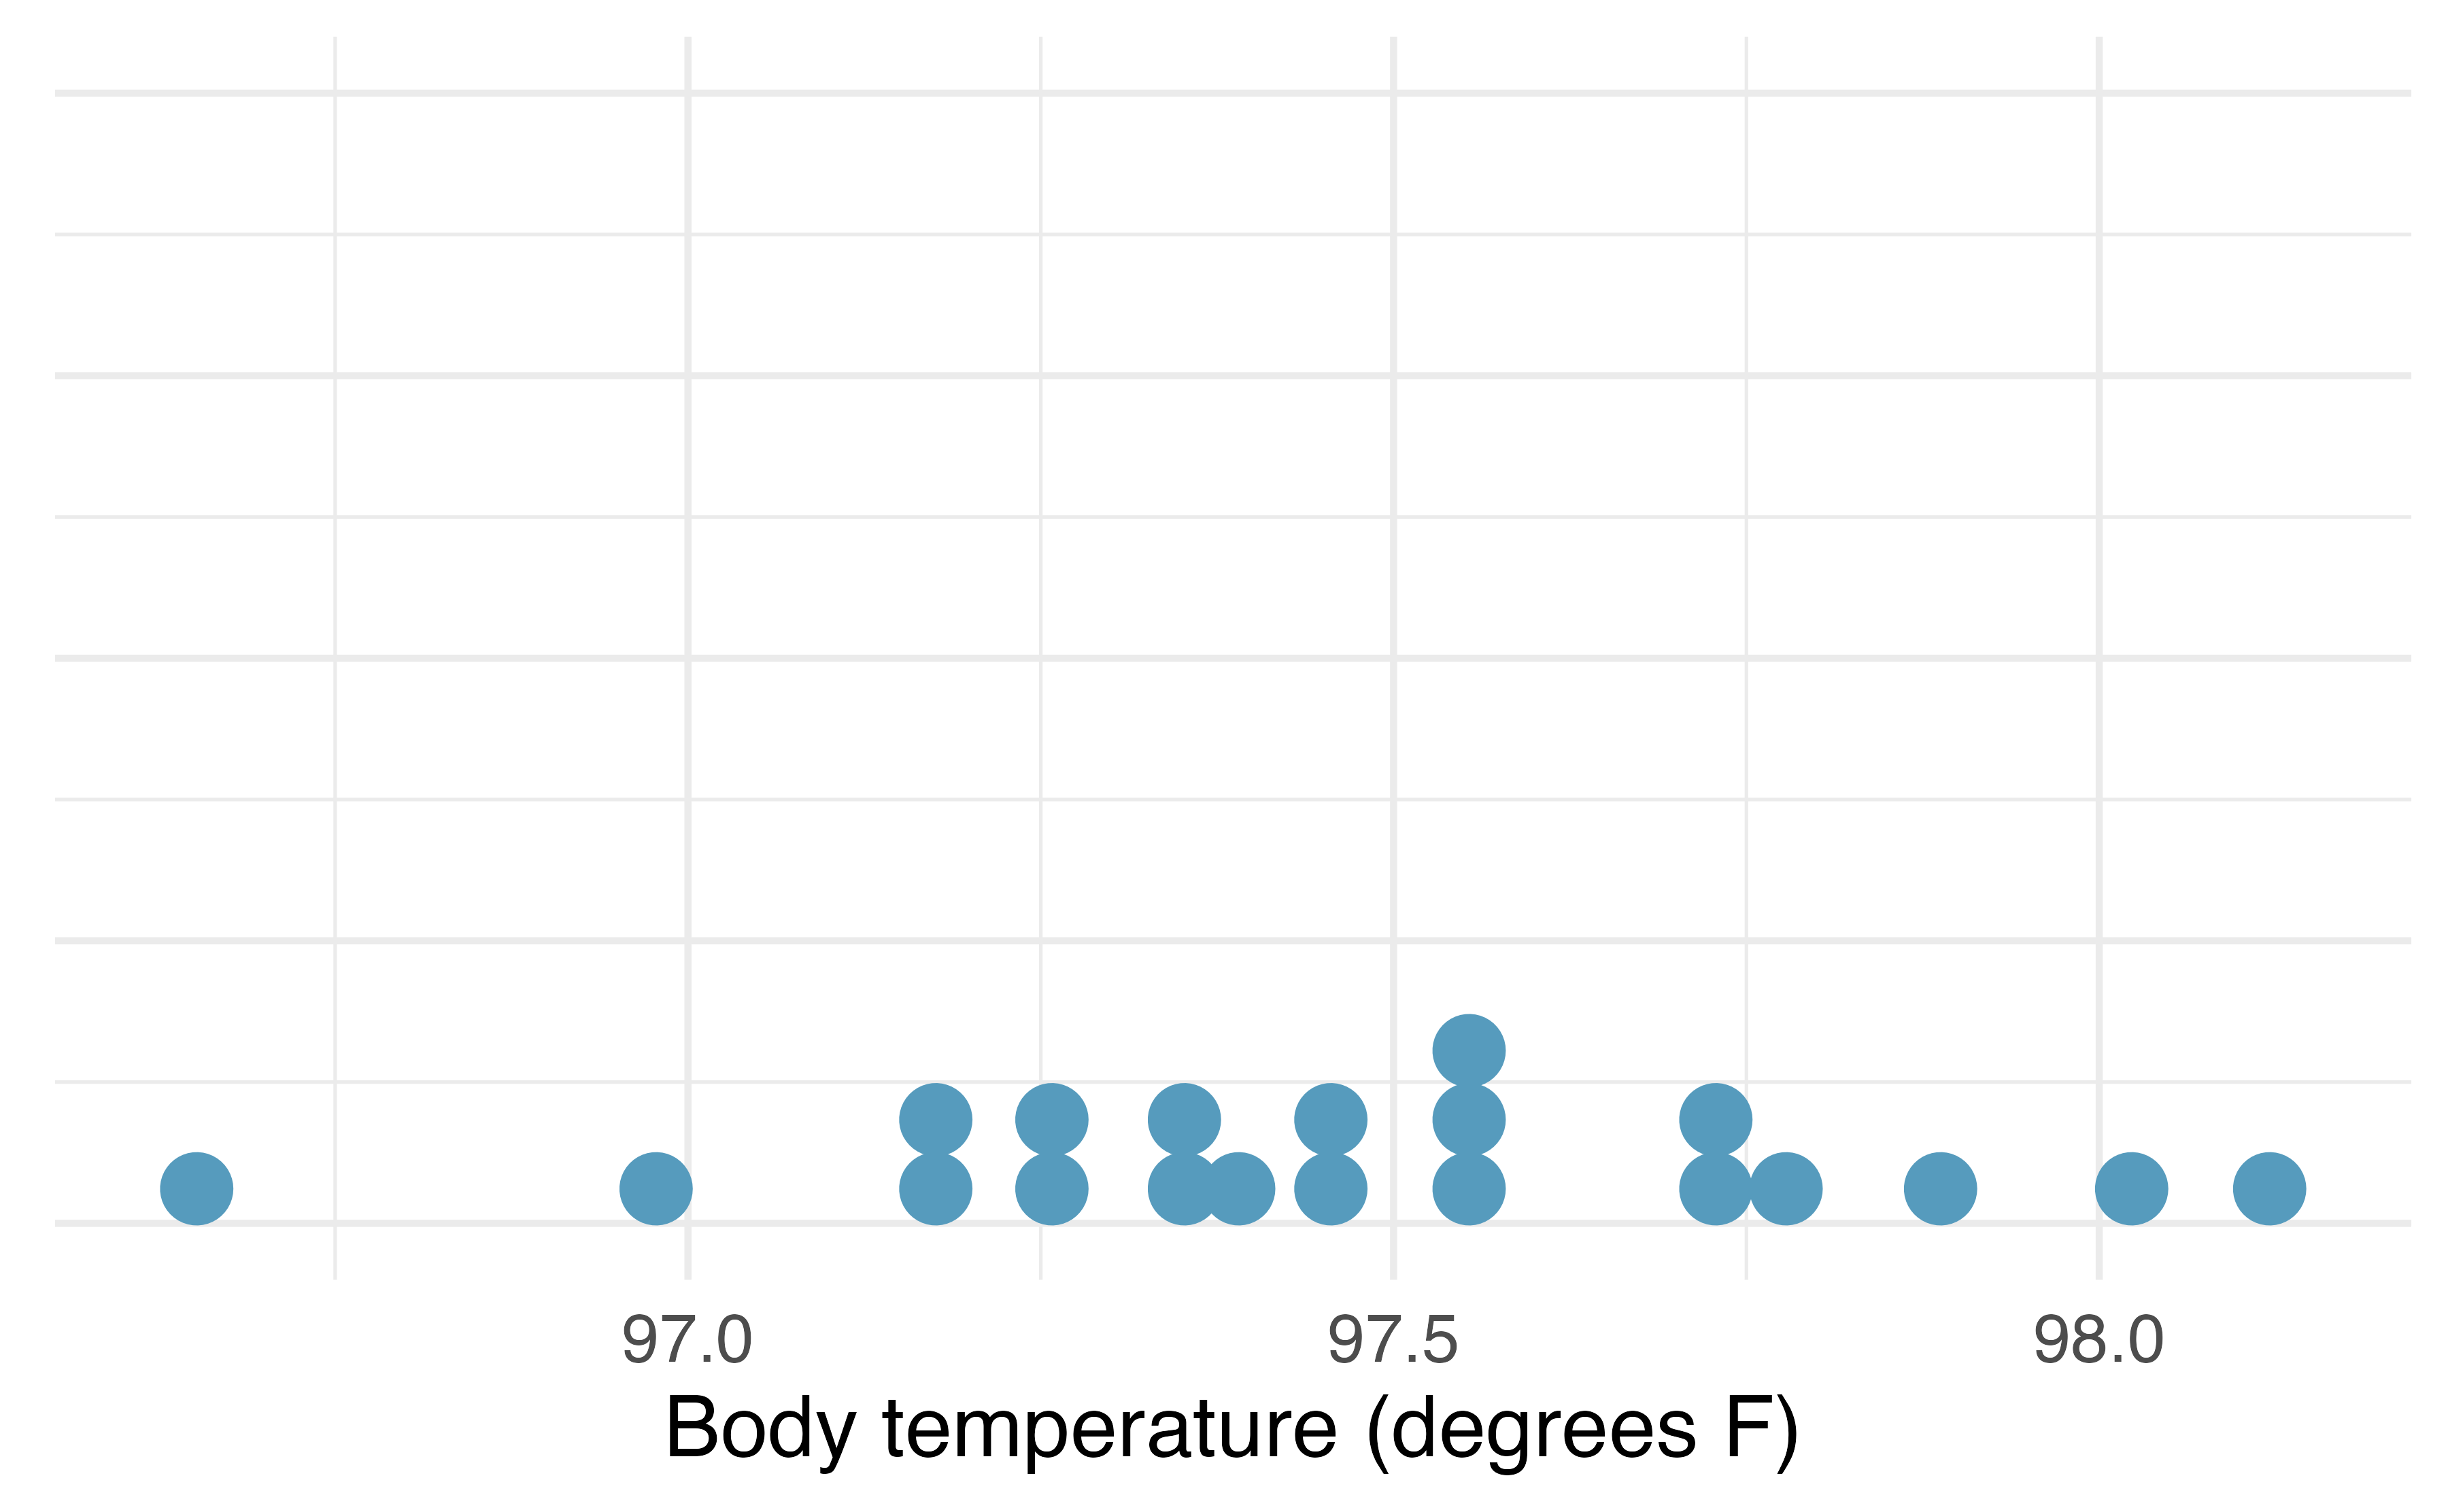 Distribution of body temperatures in a random sample of twenty Montana State University students.